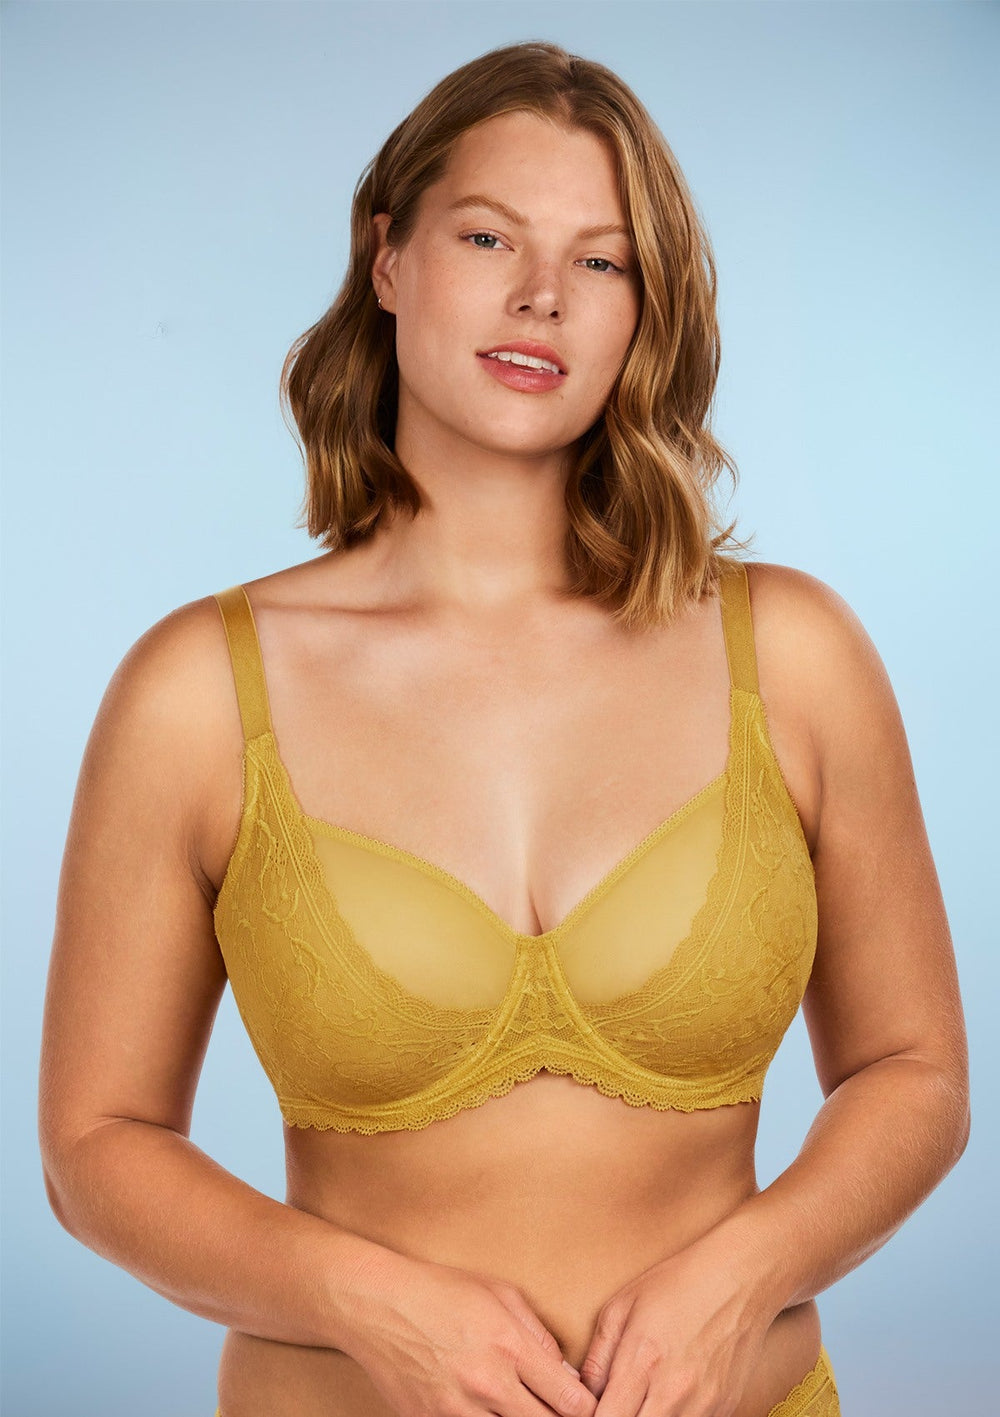 HSIA Anemone Big Bra: Best Bra for Lift and Support, Floral Bra